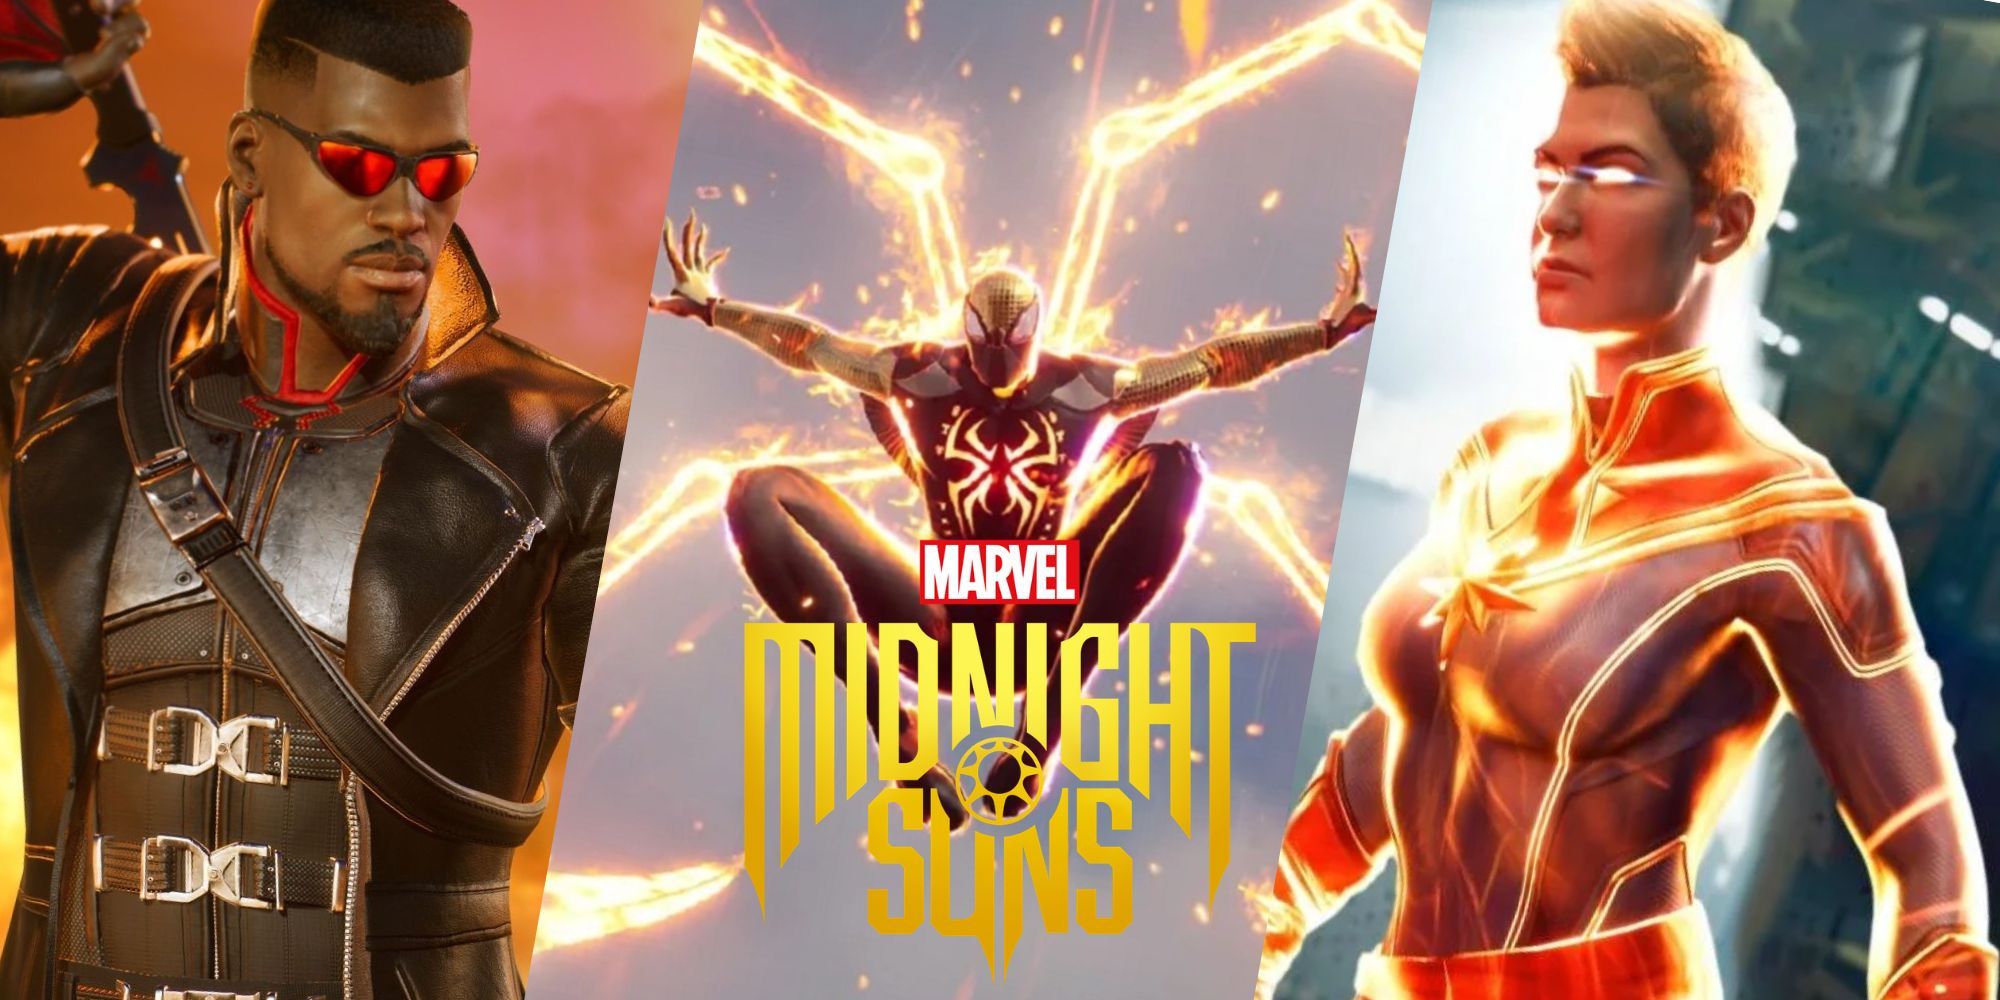 Marvel's Midnight Suns heroes guide: every hero explained and